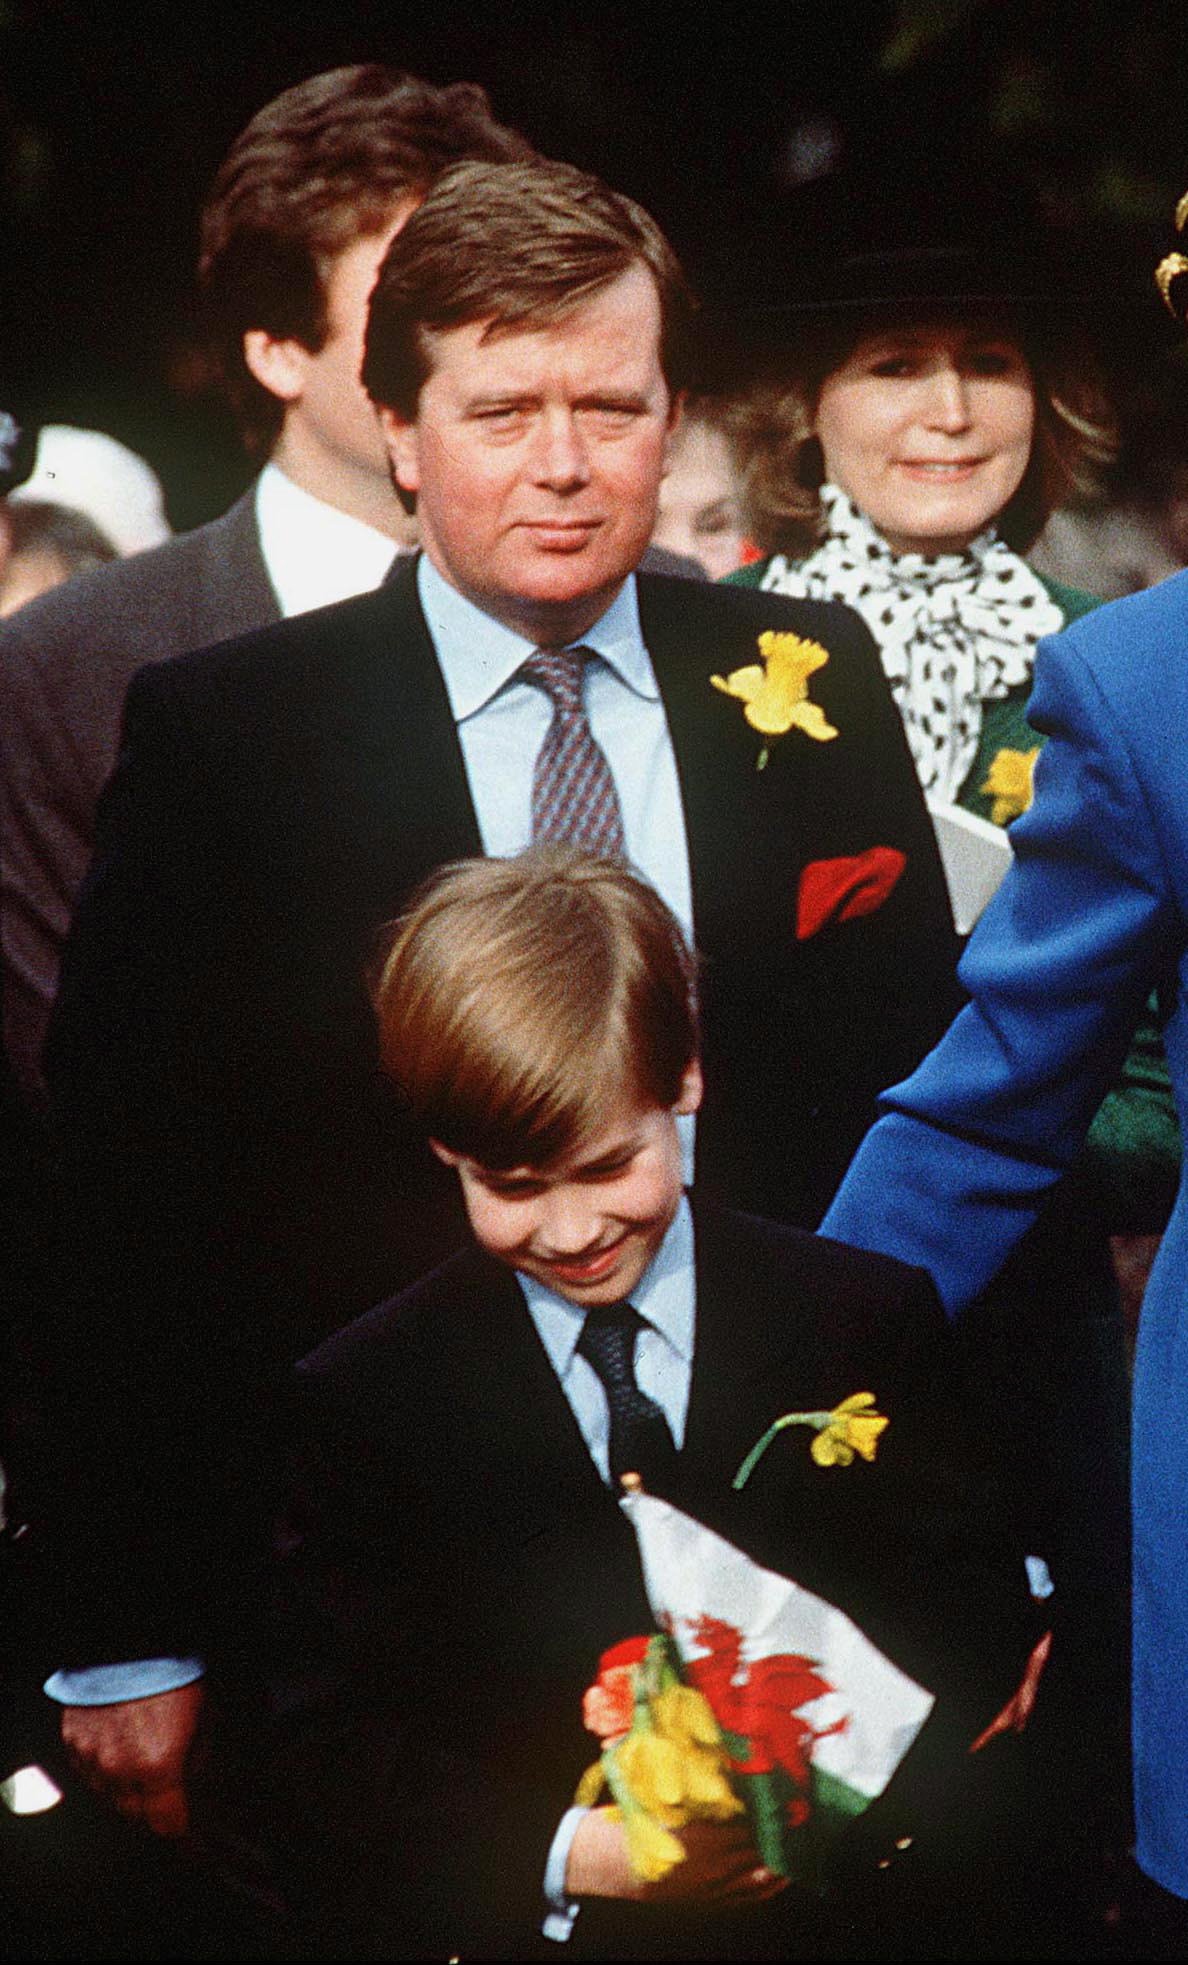 Princess Diana's bodyguard, Ken Wharfe, with her son, Prince William, during a visit to Wales, United Kingdom. / Source: Getty Images 